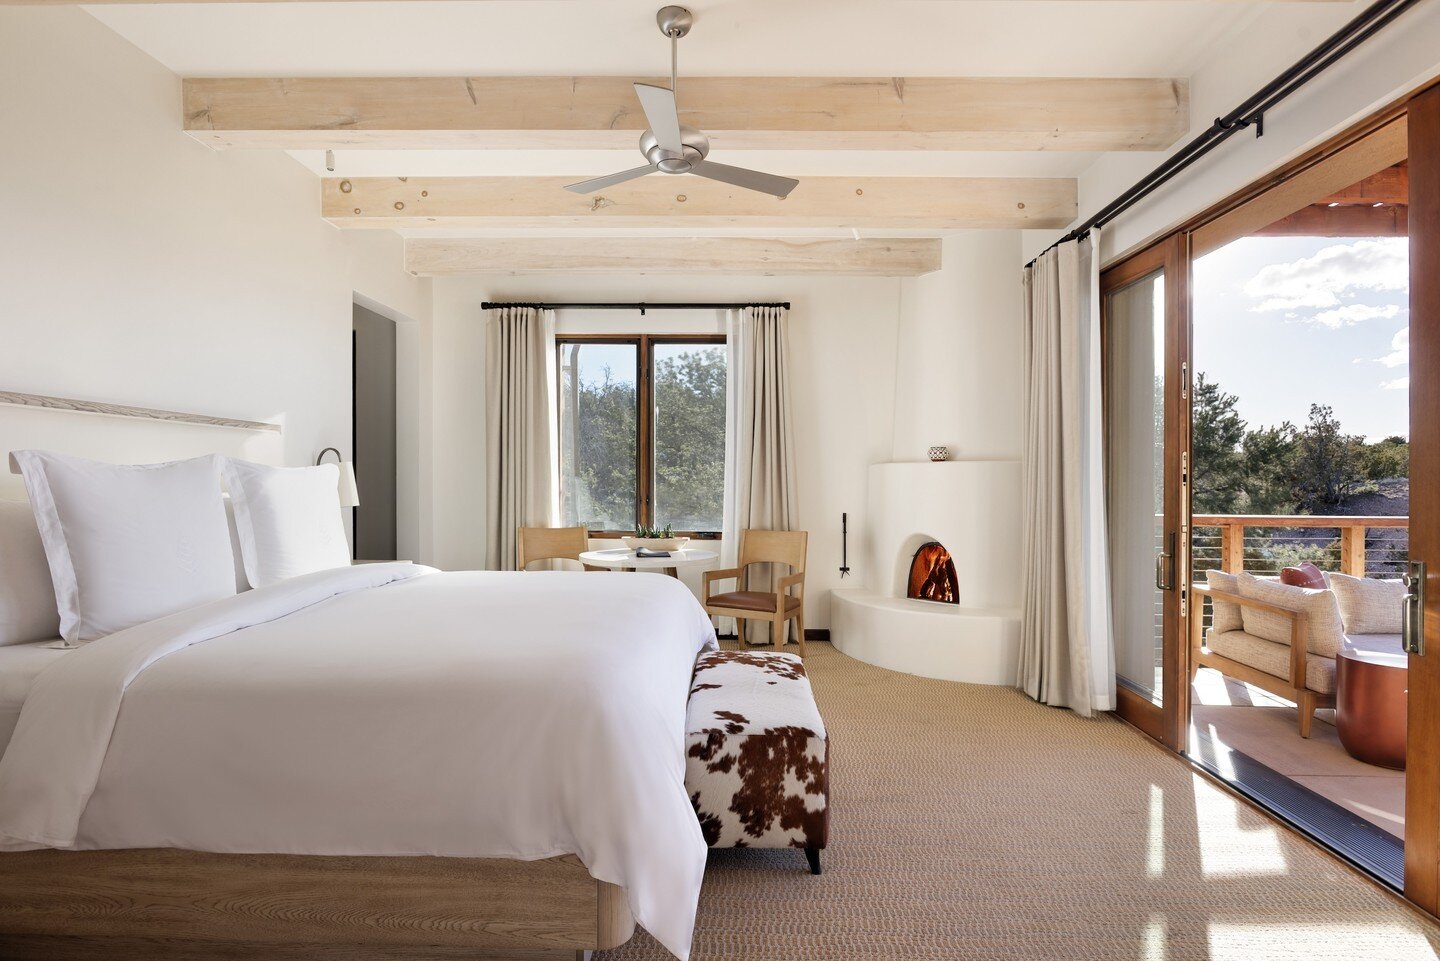 Travel plans on the brain? There's never been a better time to visit @fssantafe, which just completed a multimillion-dollar revitalization of all its 65 intimate casitas! Now home to the city&rsquo;s newest guest rooms, Rancho Encantado's exquisite n